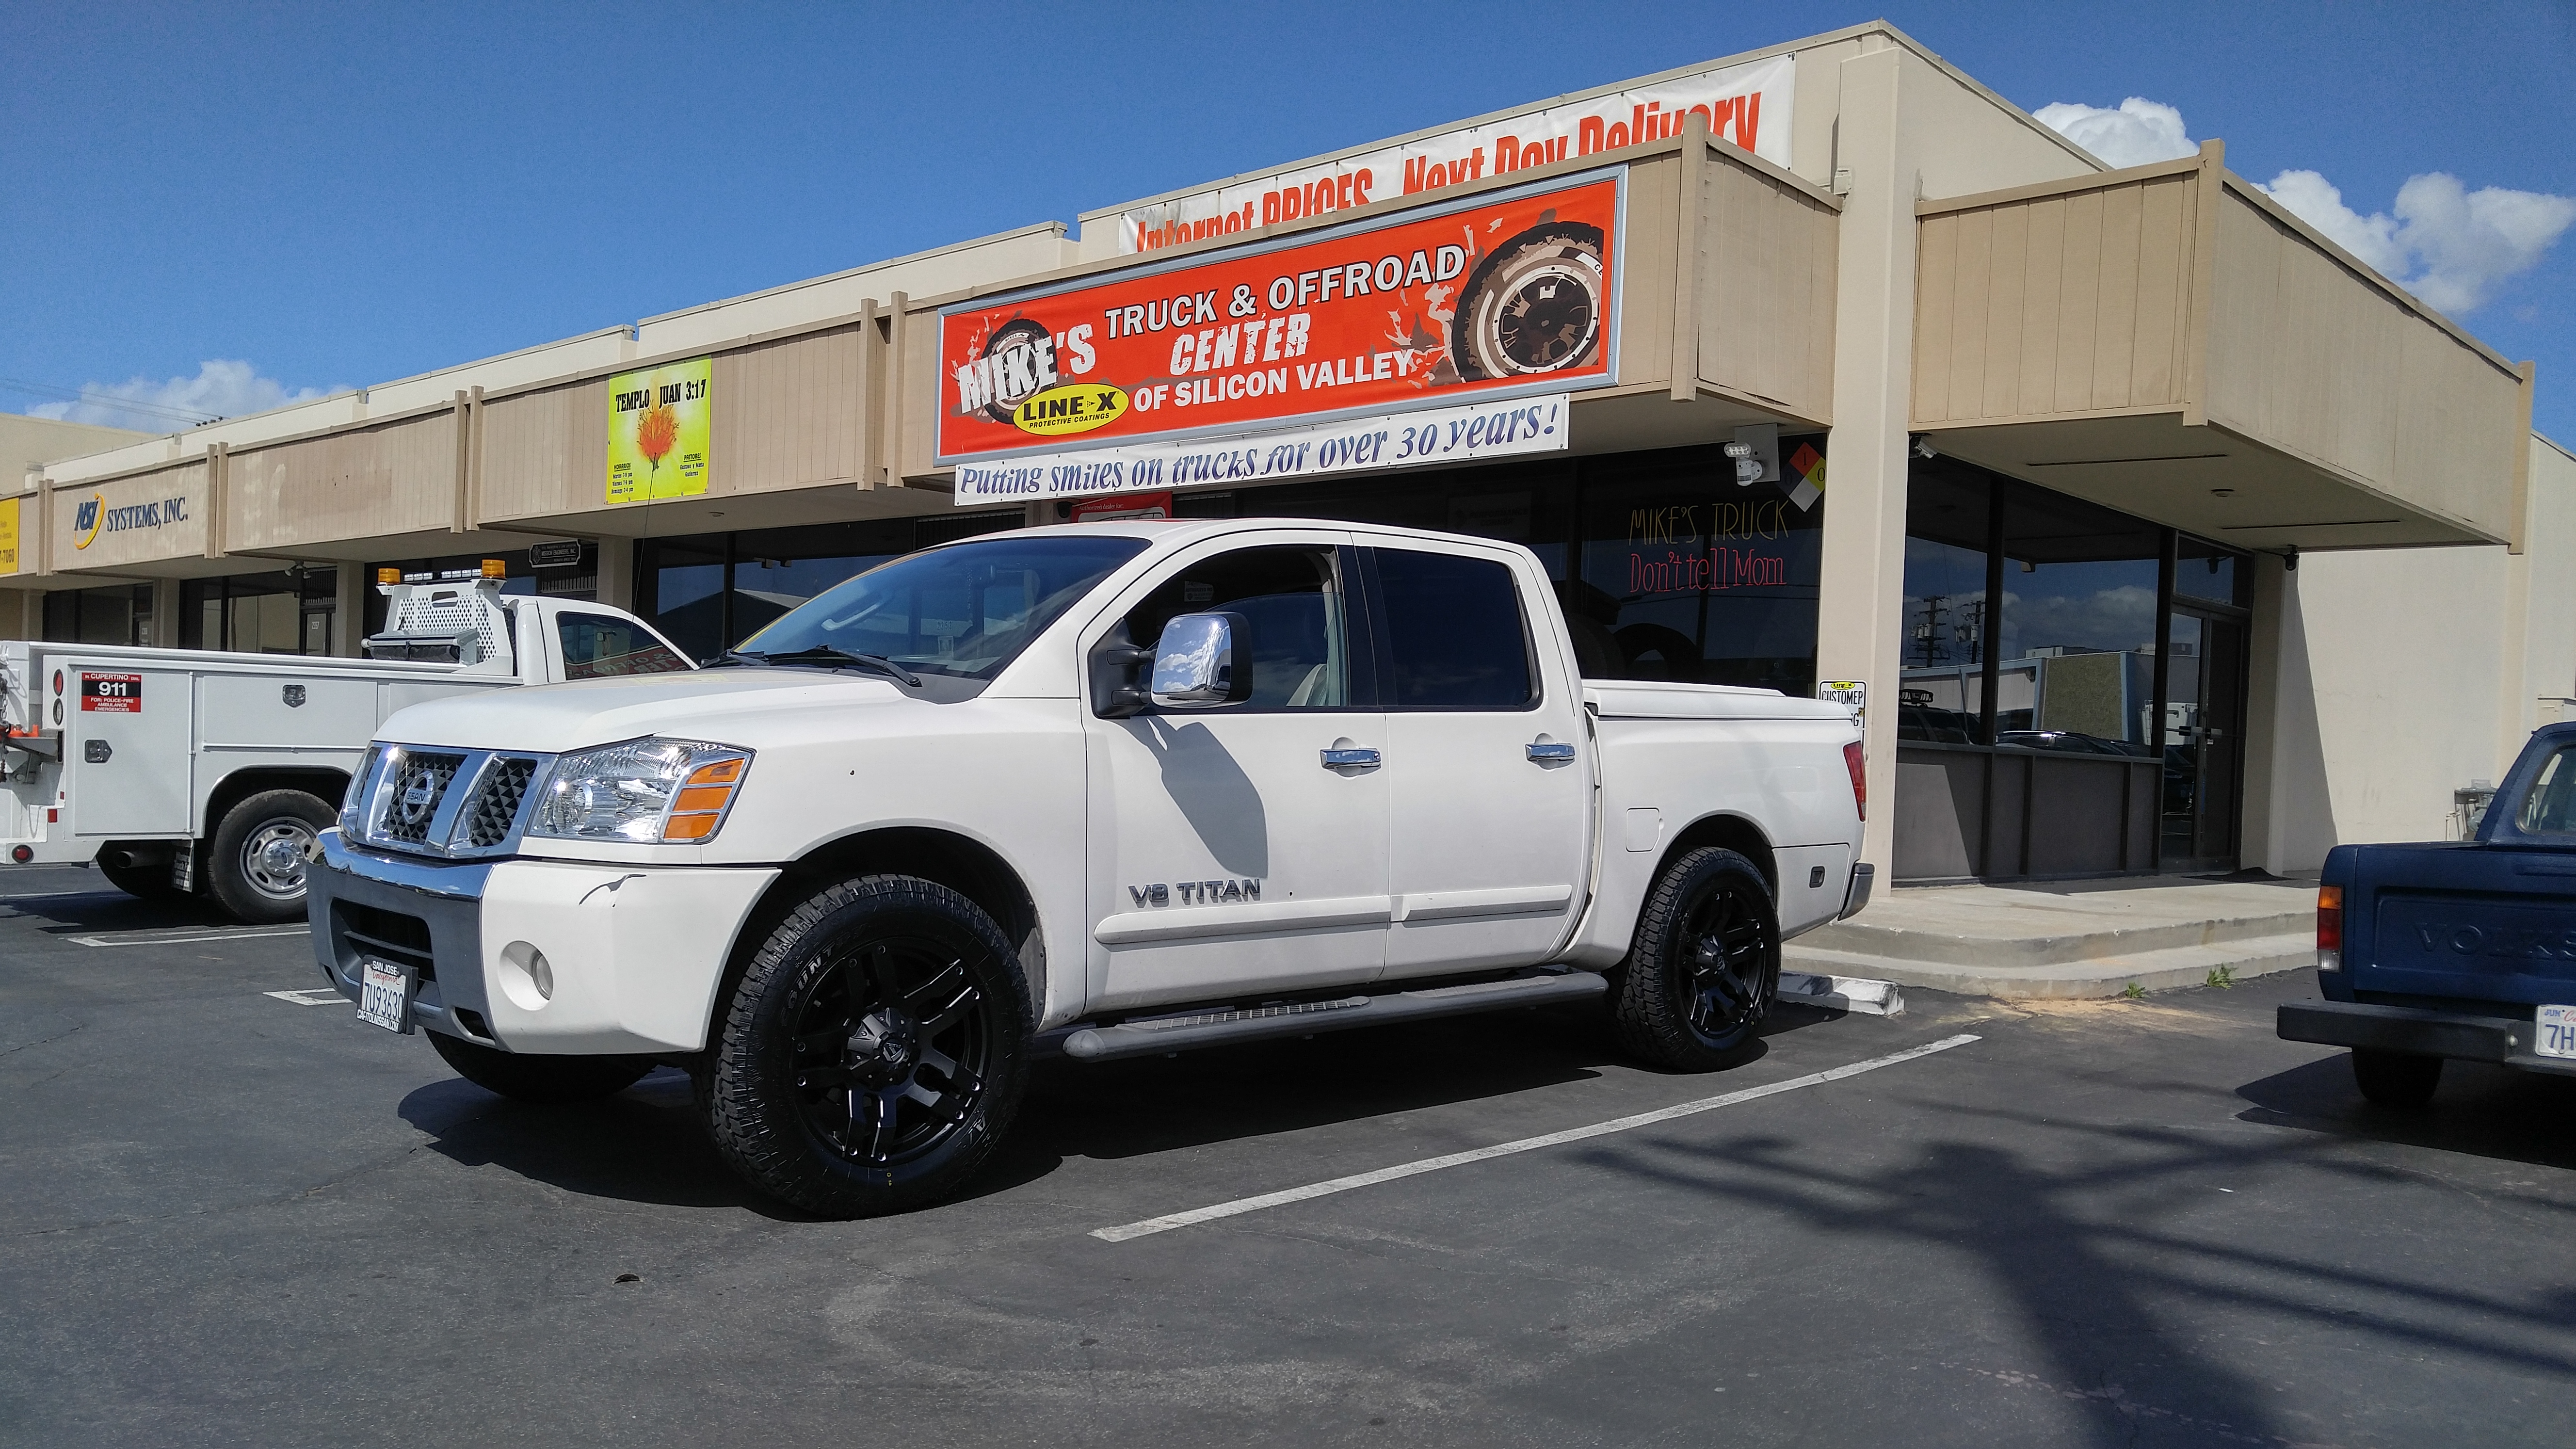 2012 Nissan Titan - Installed 2 1/2" leveling kit - Ready Lift in front, 20X9 Fuel Pump Rims with 275/60R20(33") Toyo Open Country